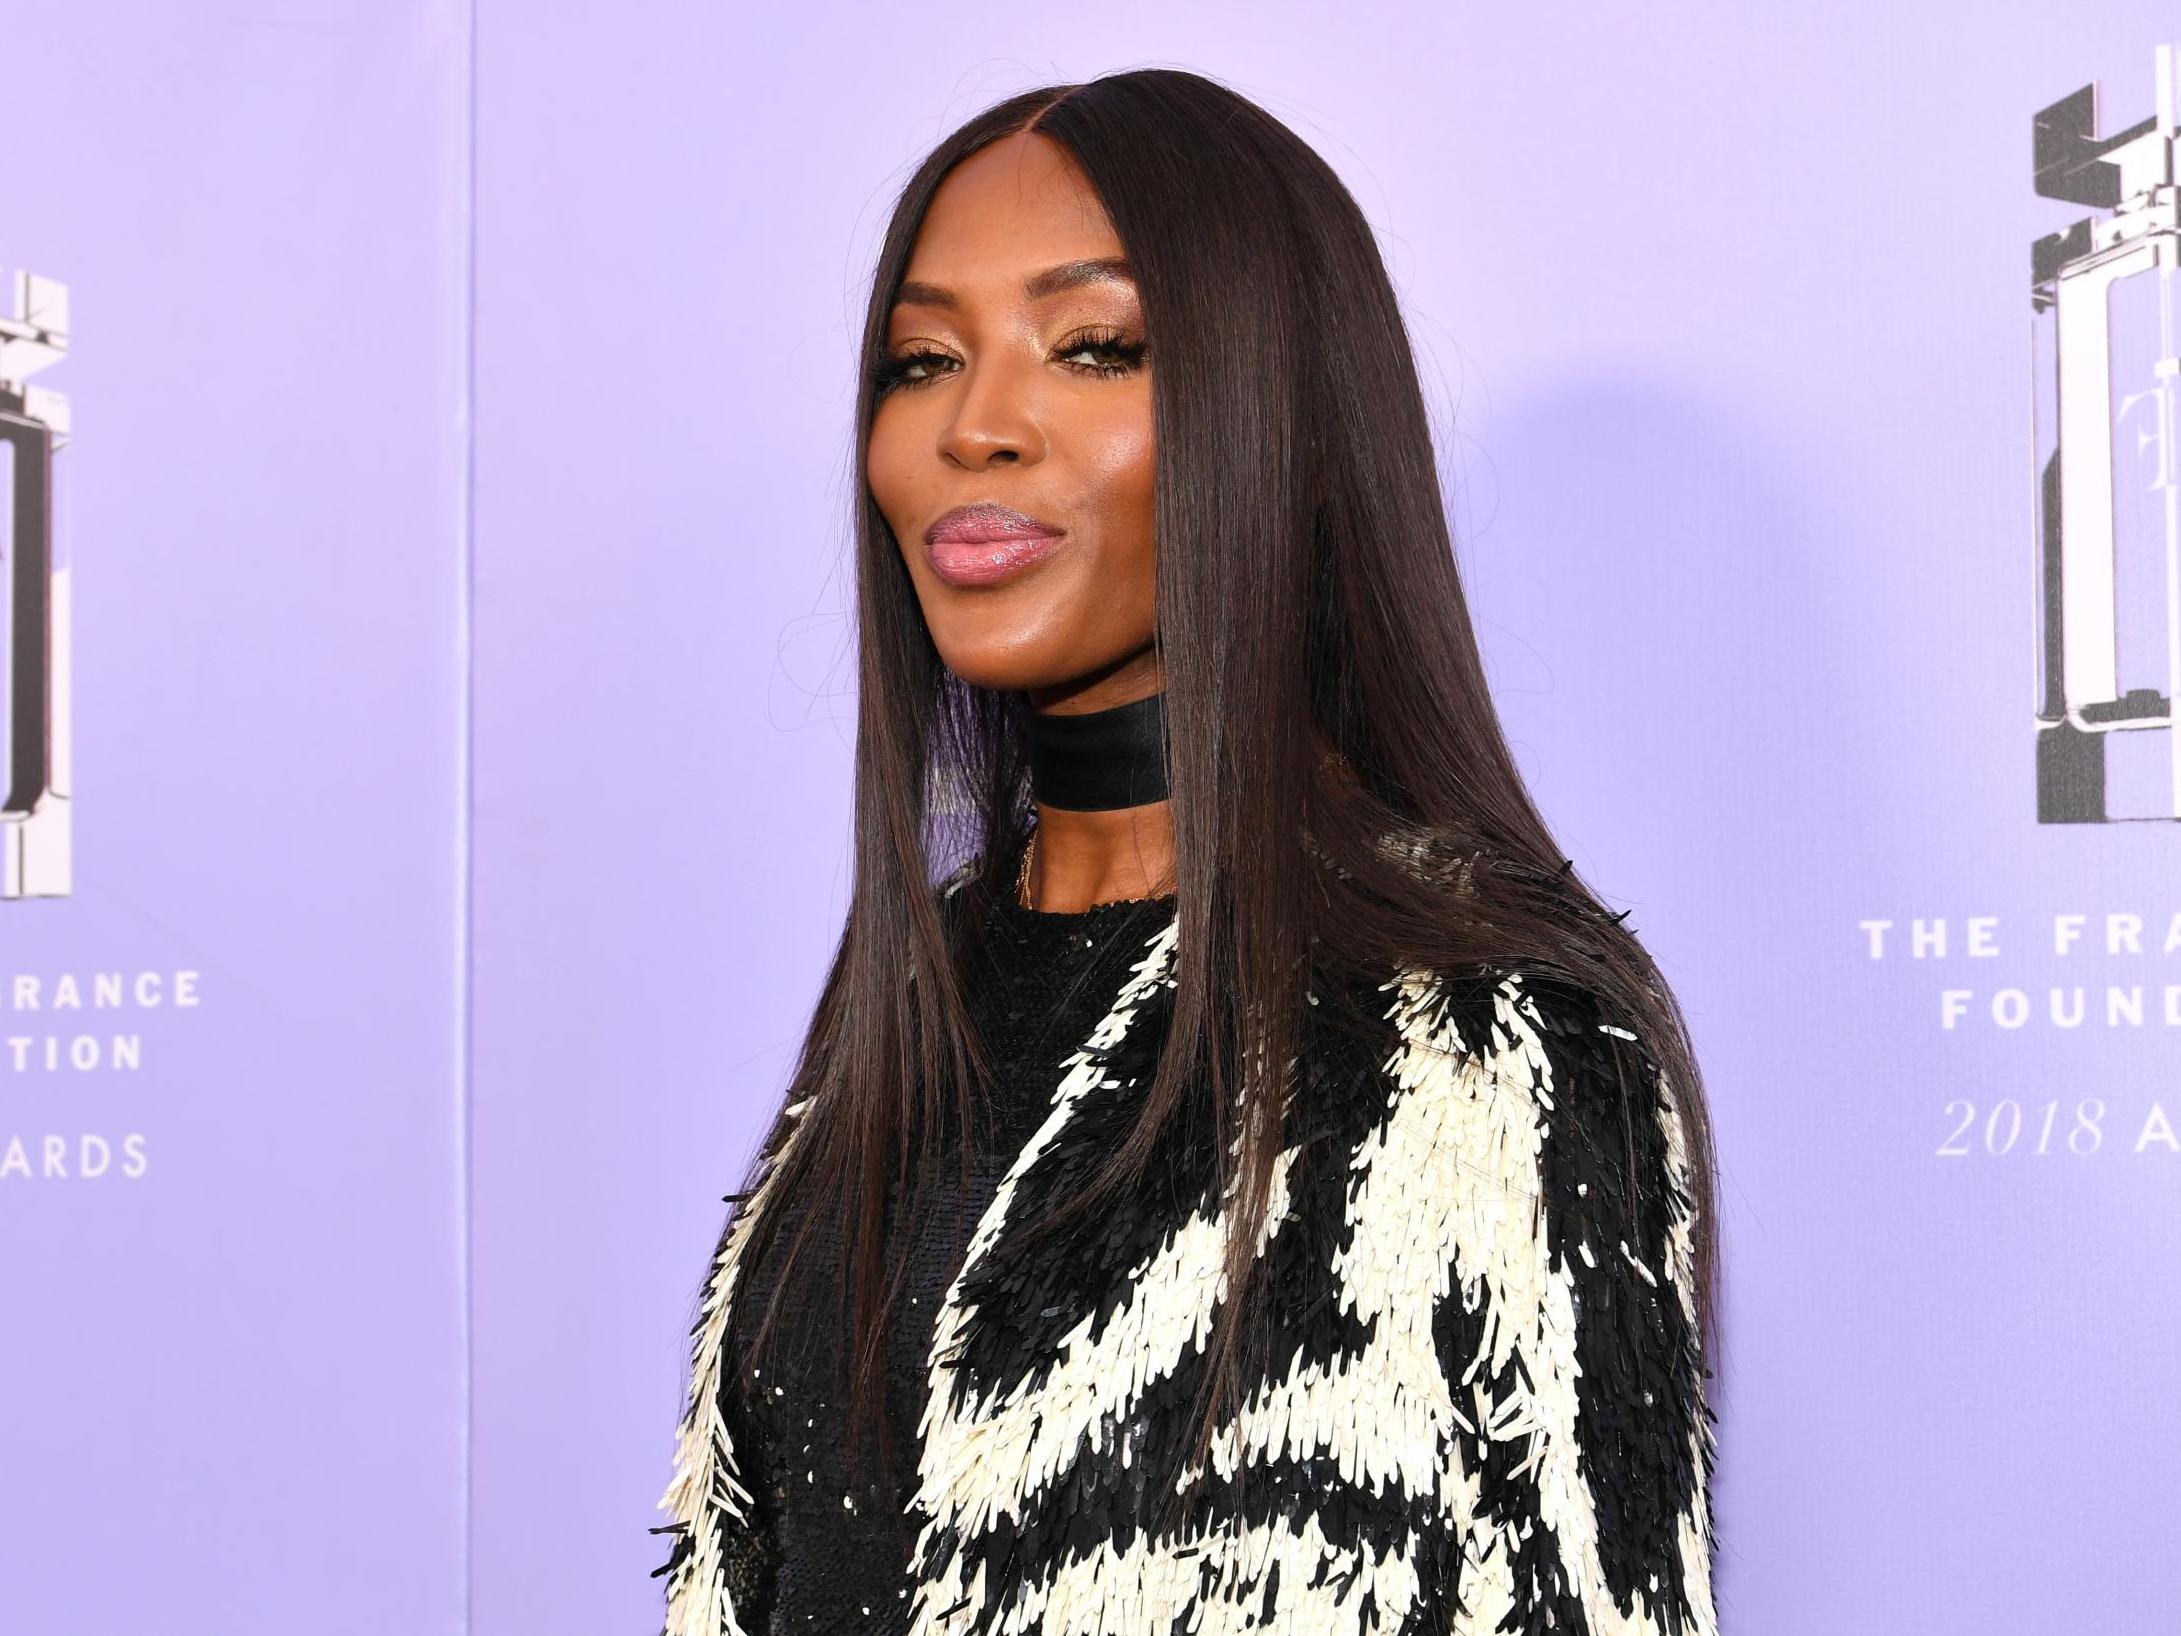 Naomi Campbell says a country wouldn't run her campaign because she's black  